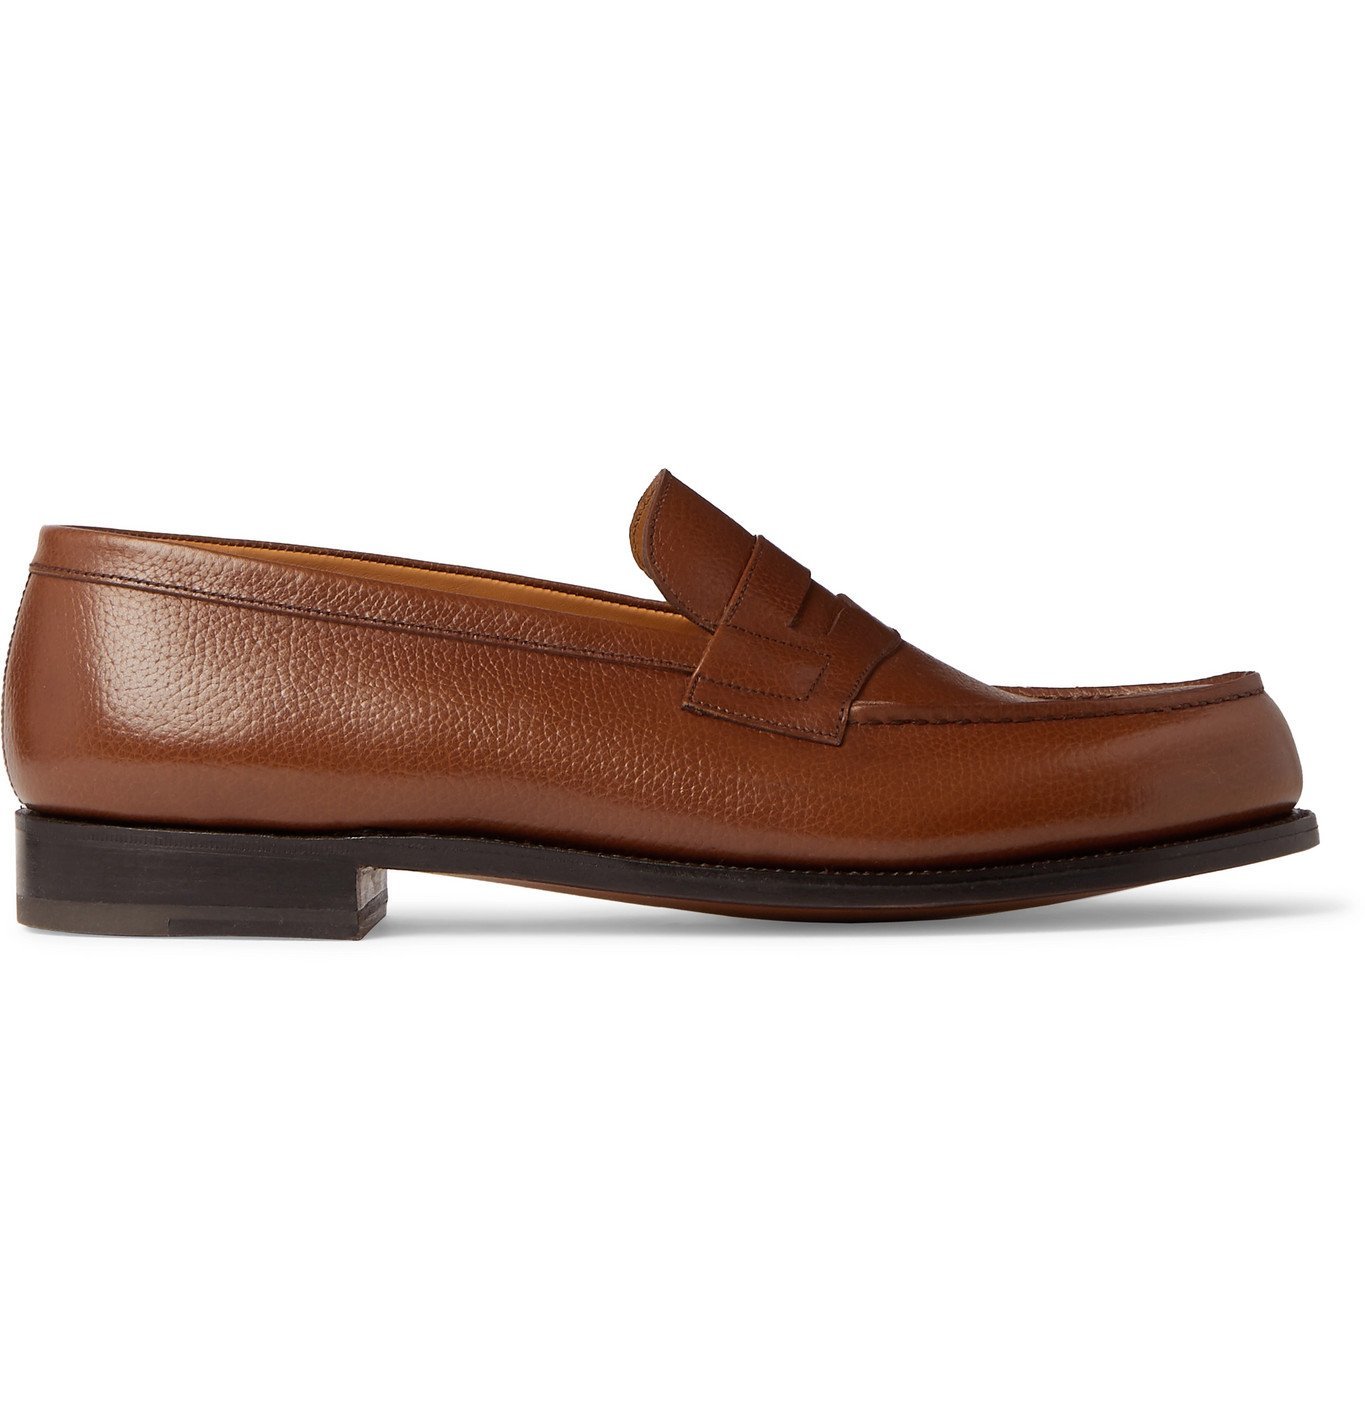 J.M. Weston - 180 Moccasin Full-Grain Leather Loafers - Brown J.M. Weston